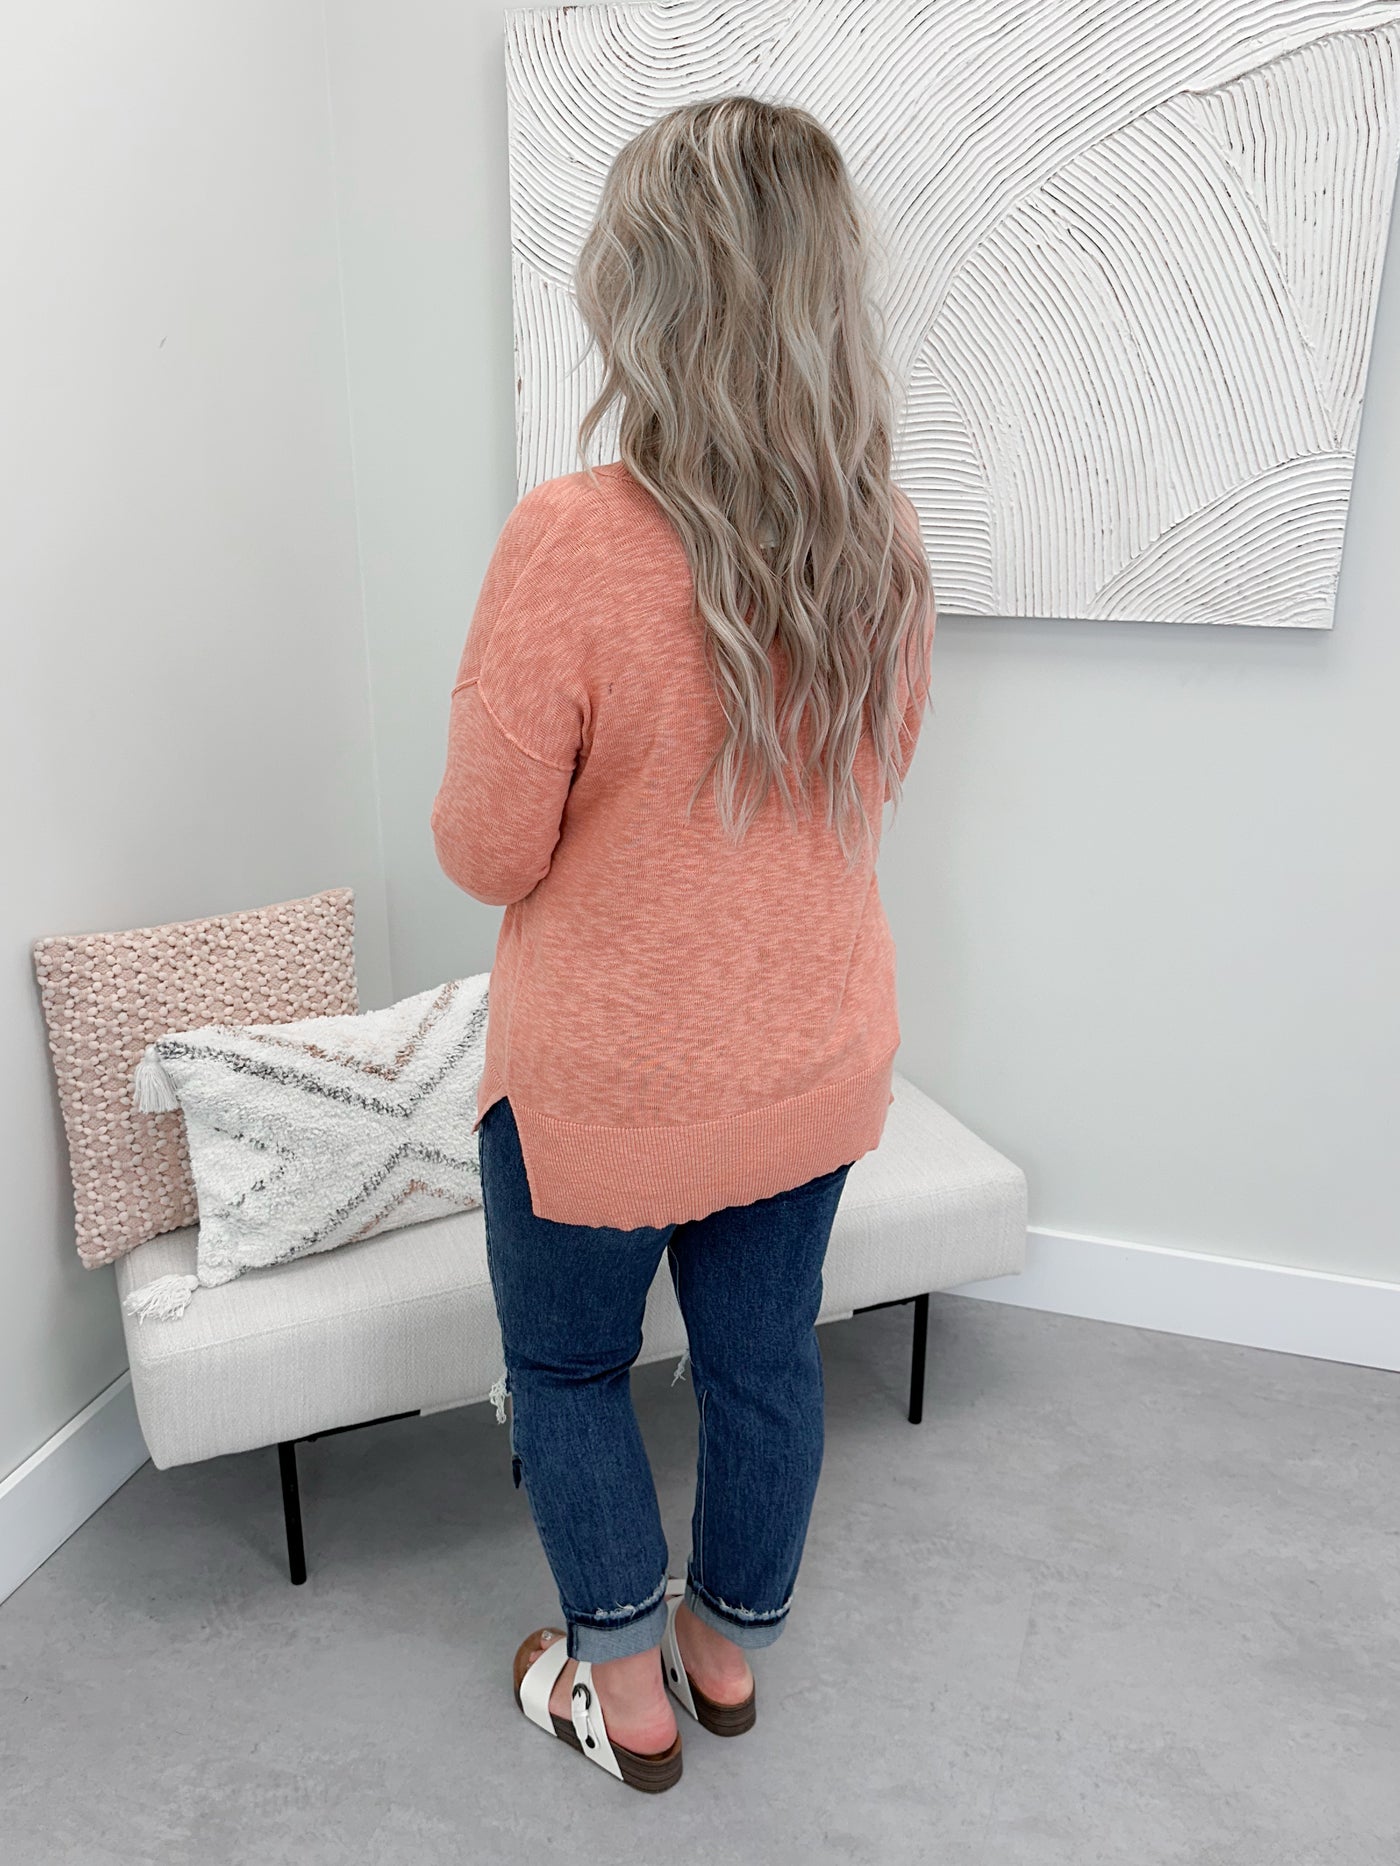 Laidback Sweater in Apricot